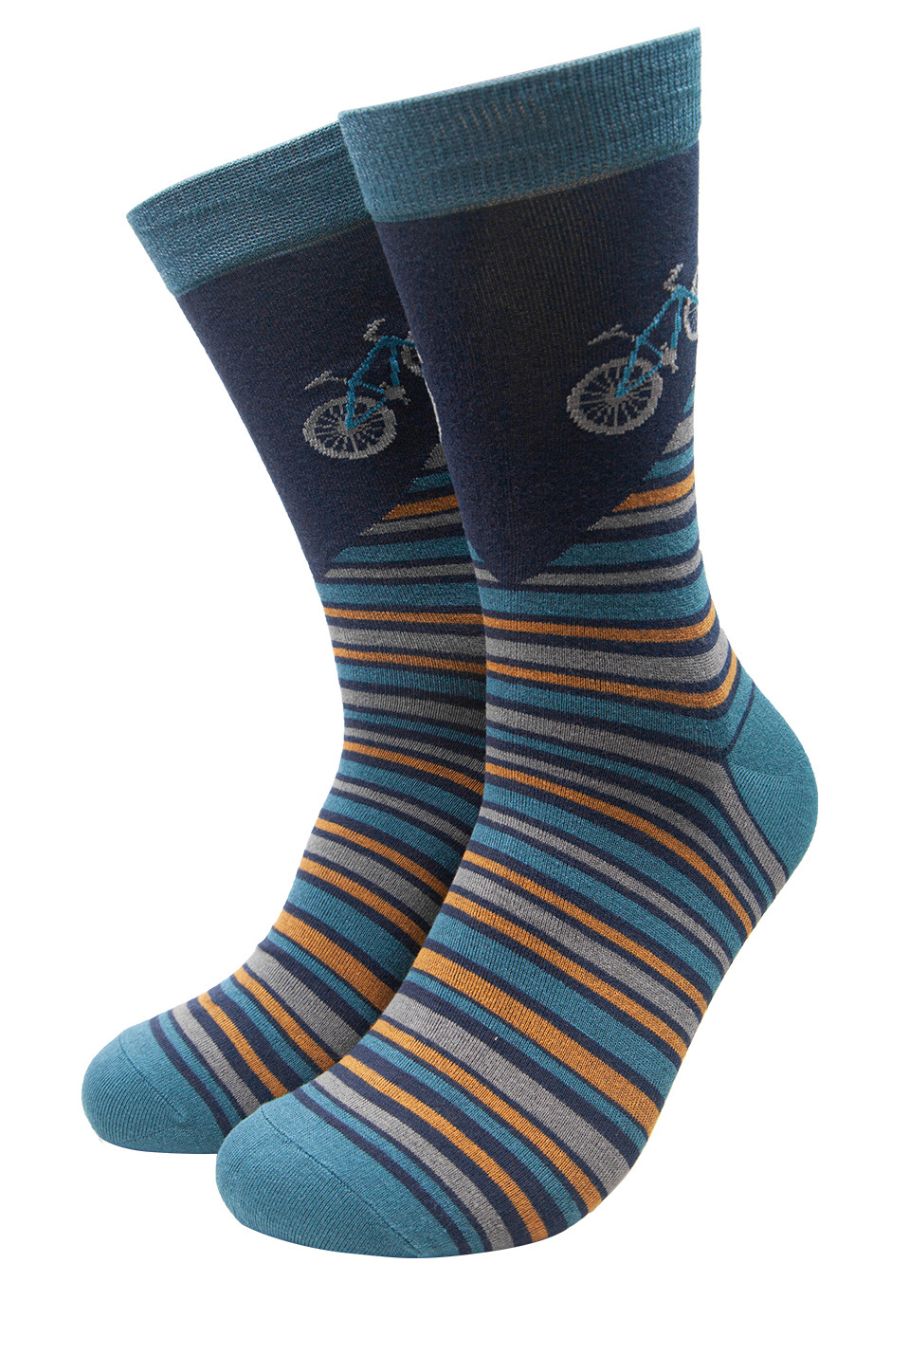 teal, blue striped socks with a mountain bike on the ankle